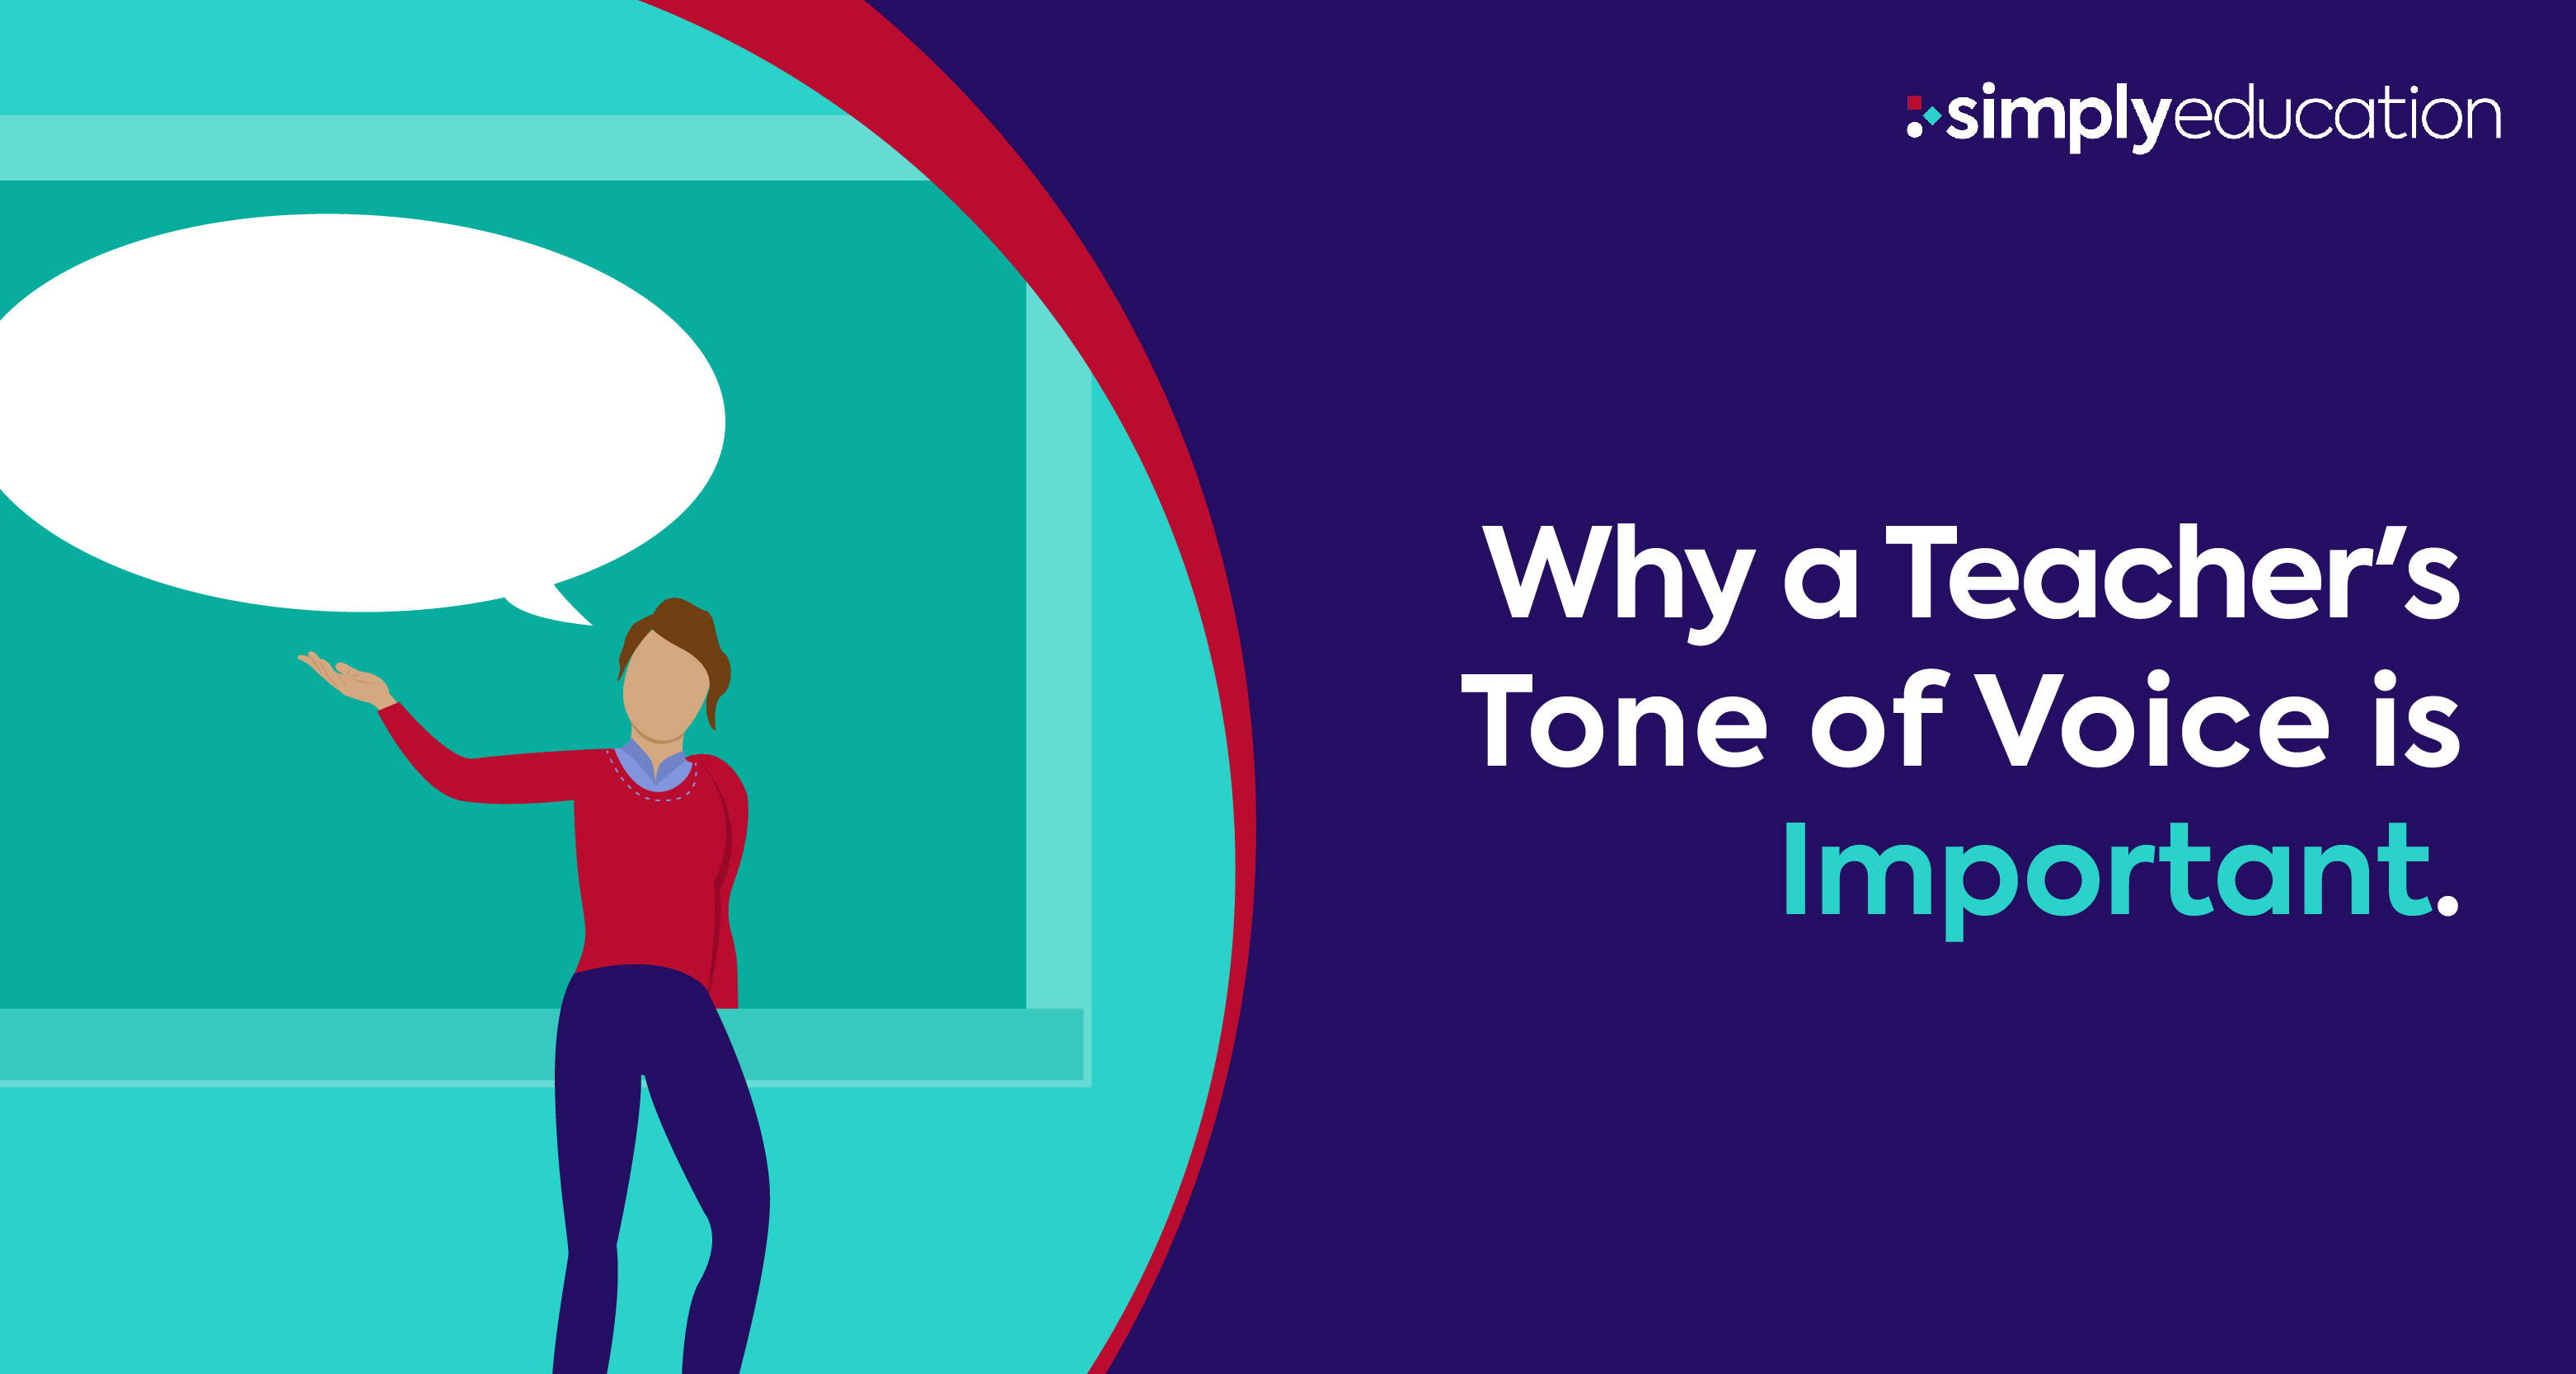 Why a Teacher's Tone of Voice is Important